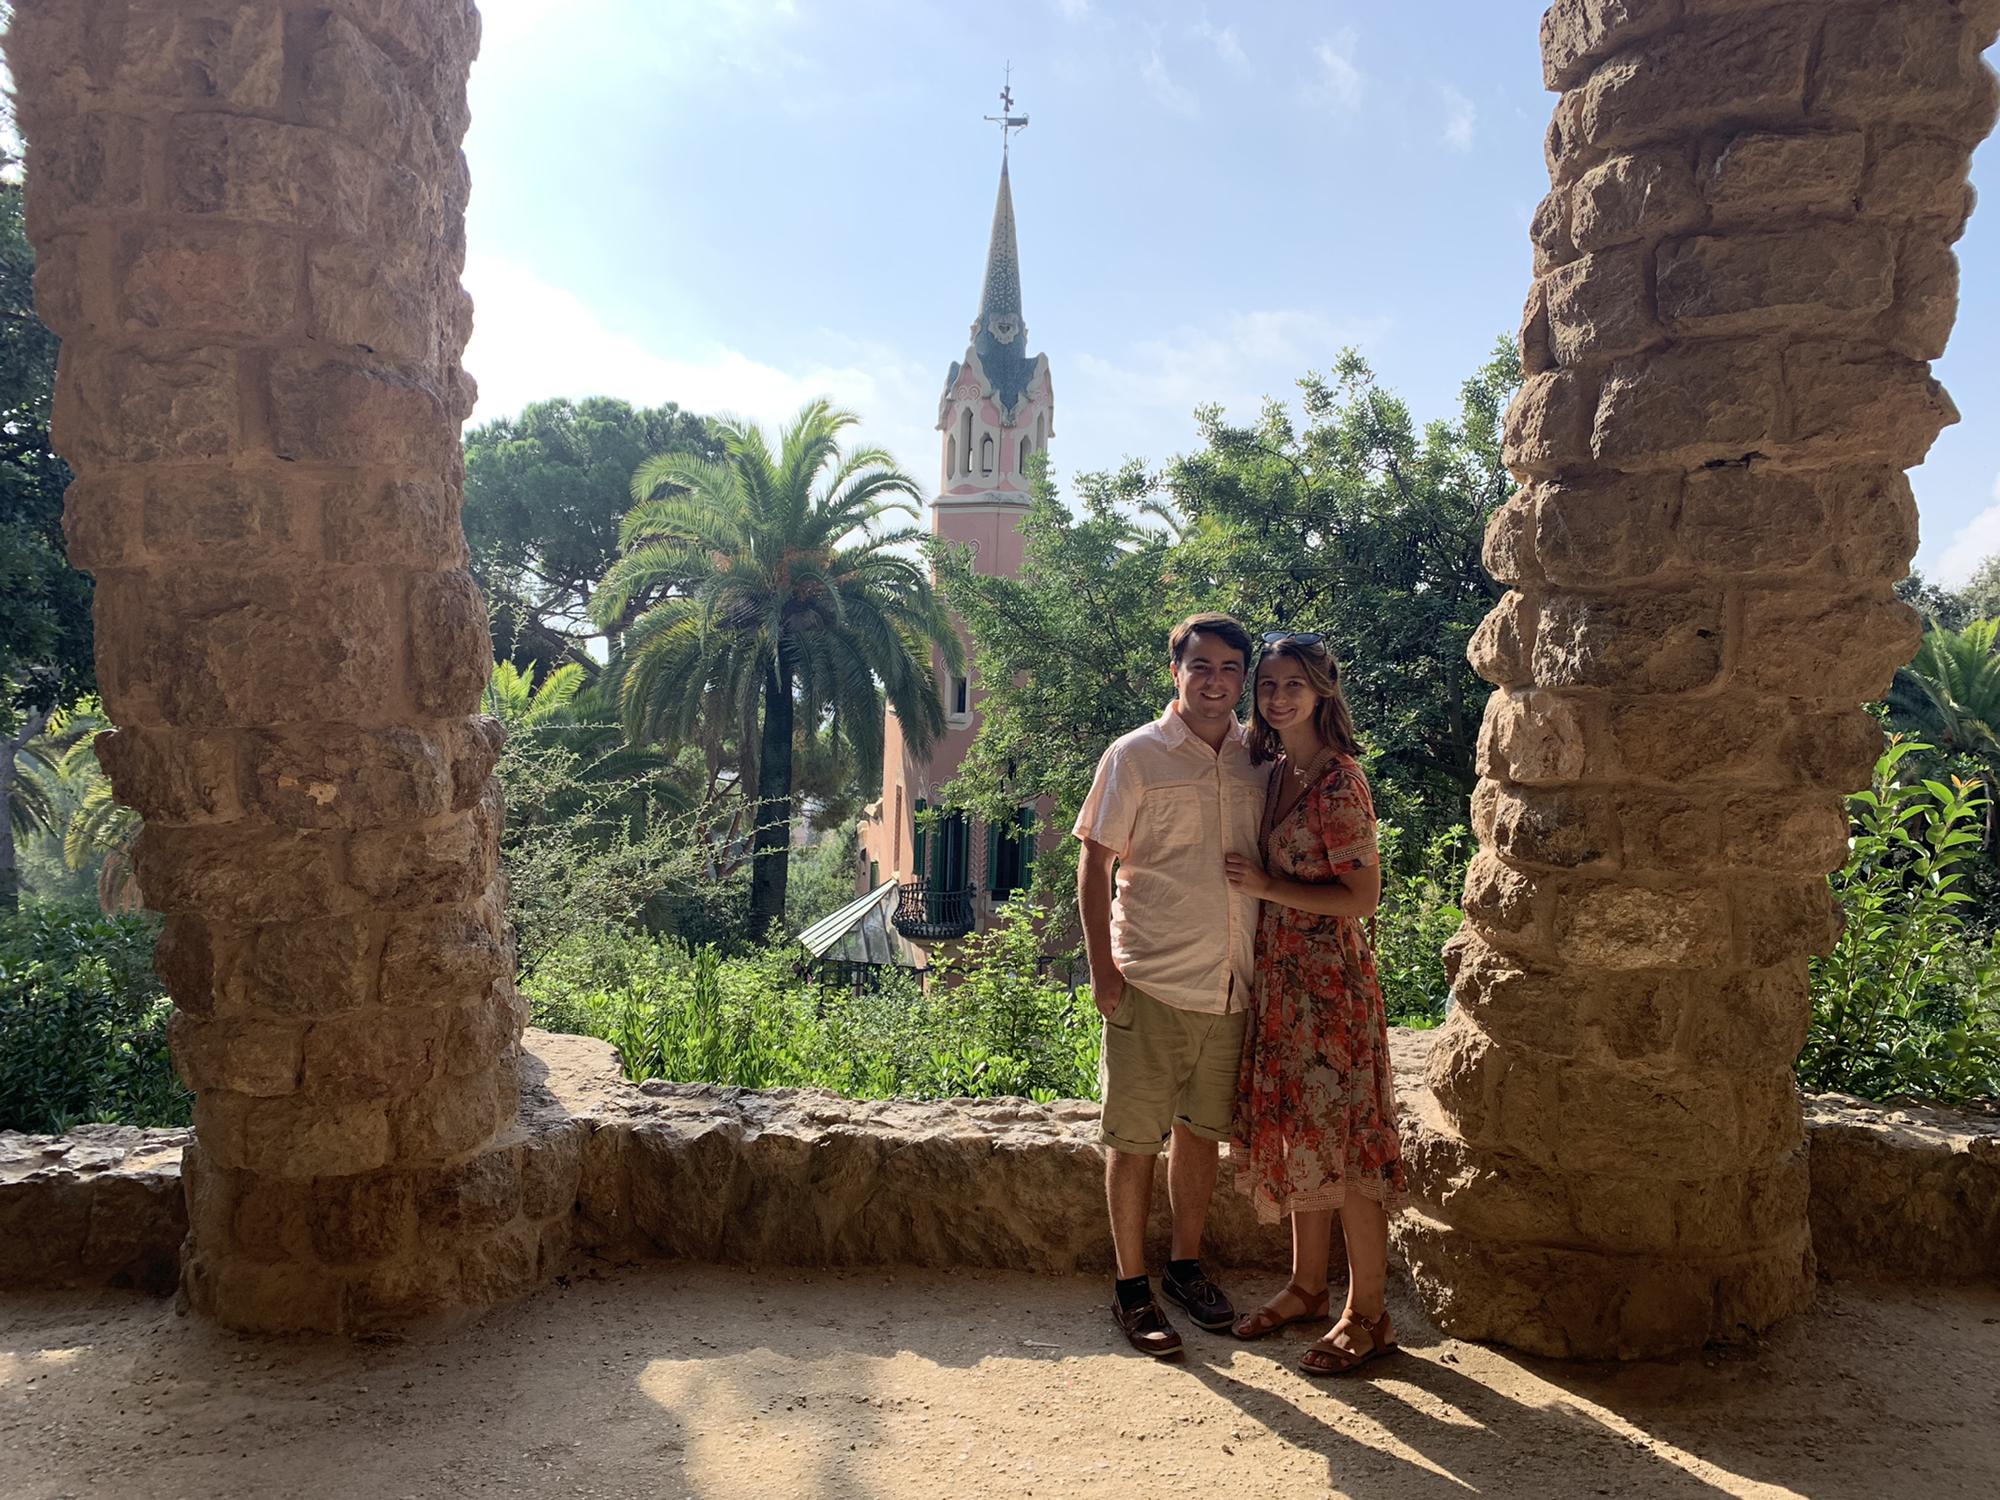 Parque Guell, Barcelona 2019 Columbus Day trip!